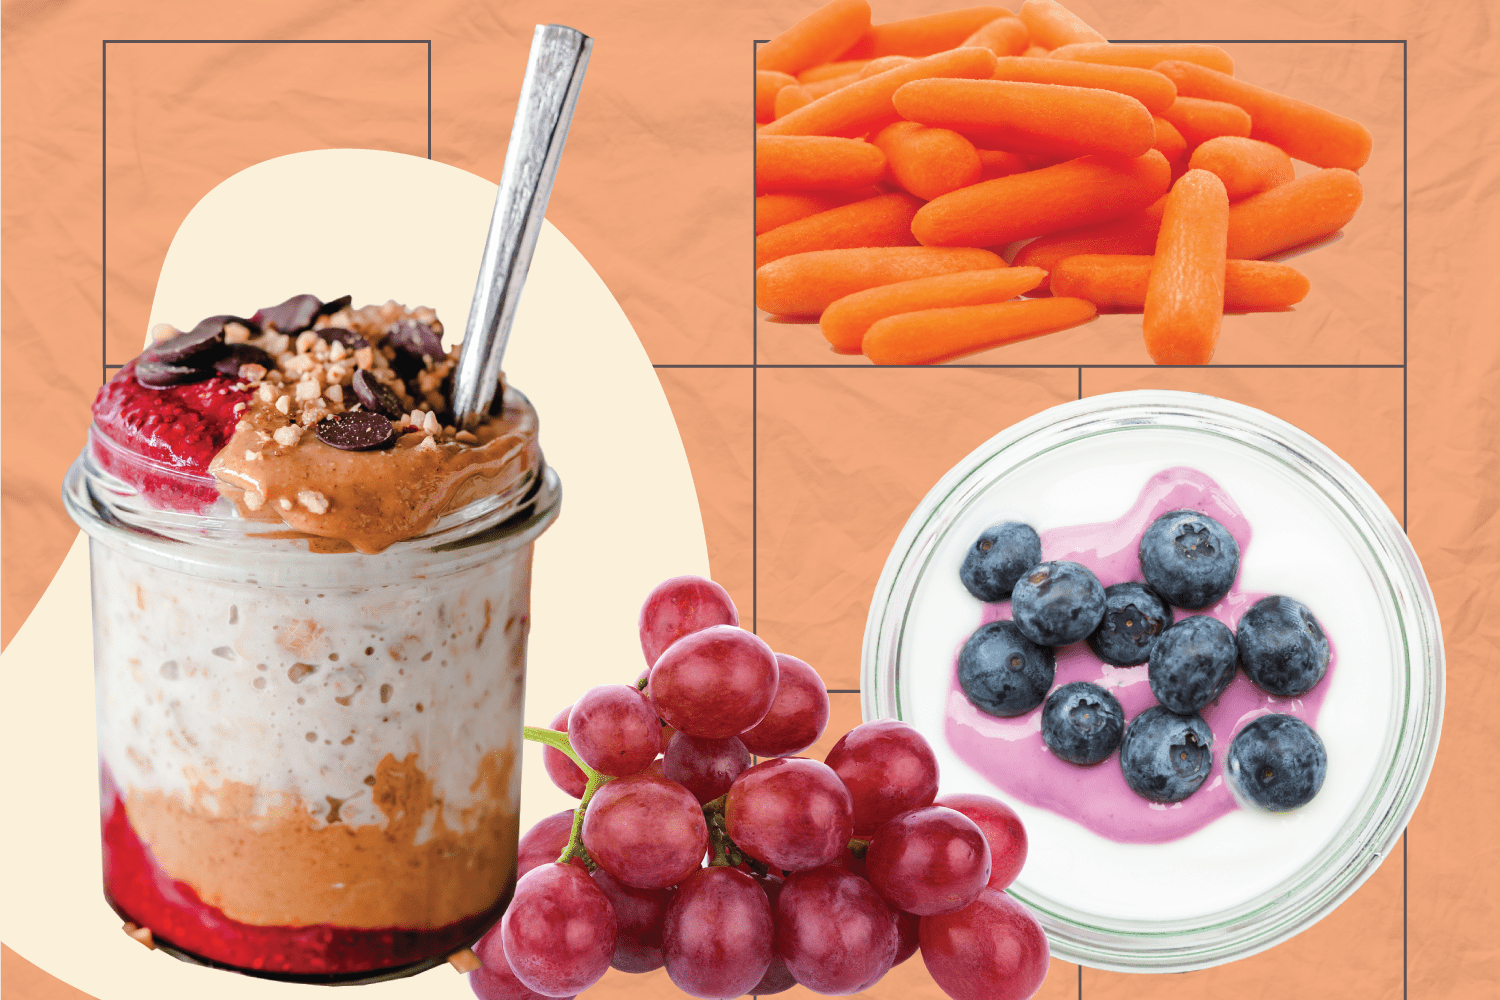 Meal Plan for Weight Loss with yogurt, overnight oats, carrots, and grapes